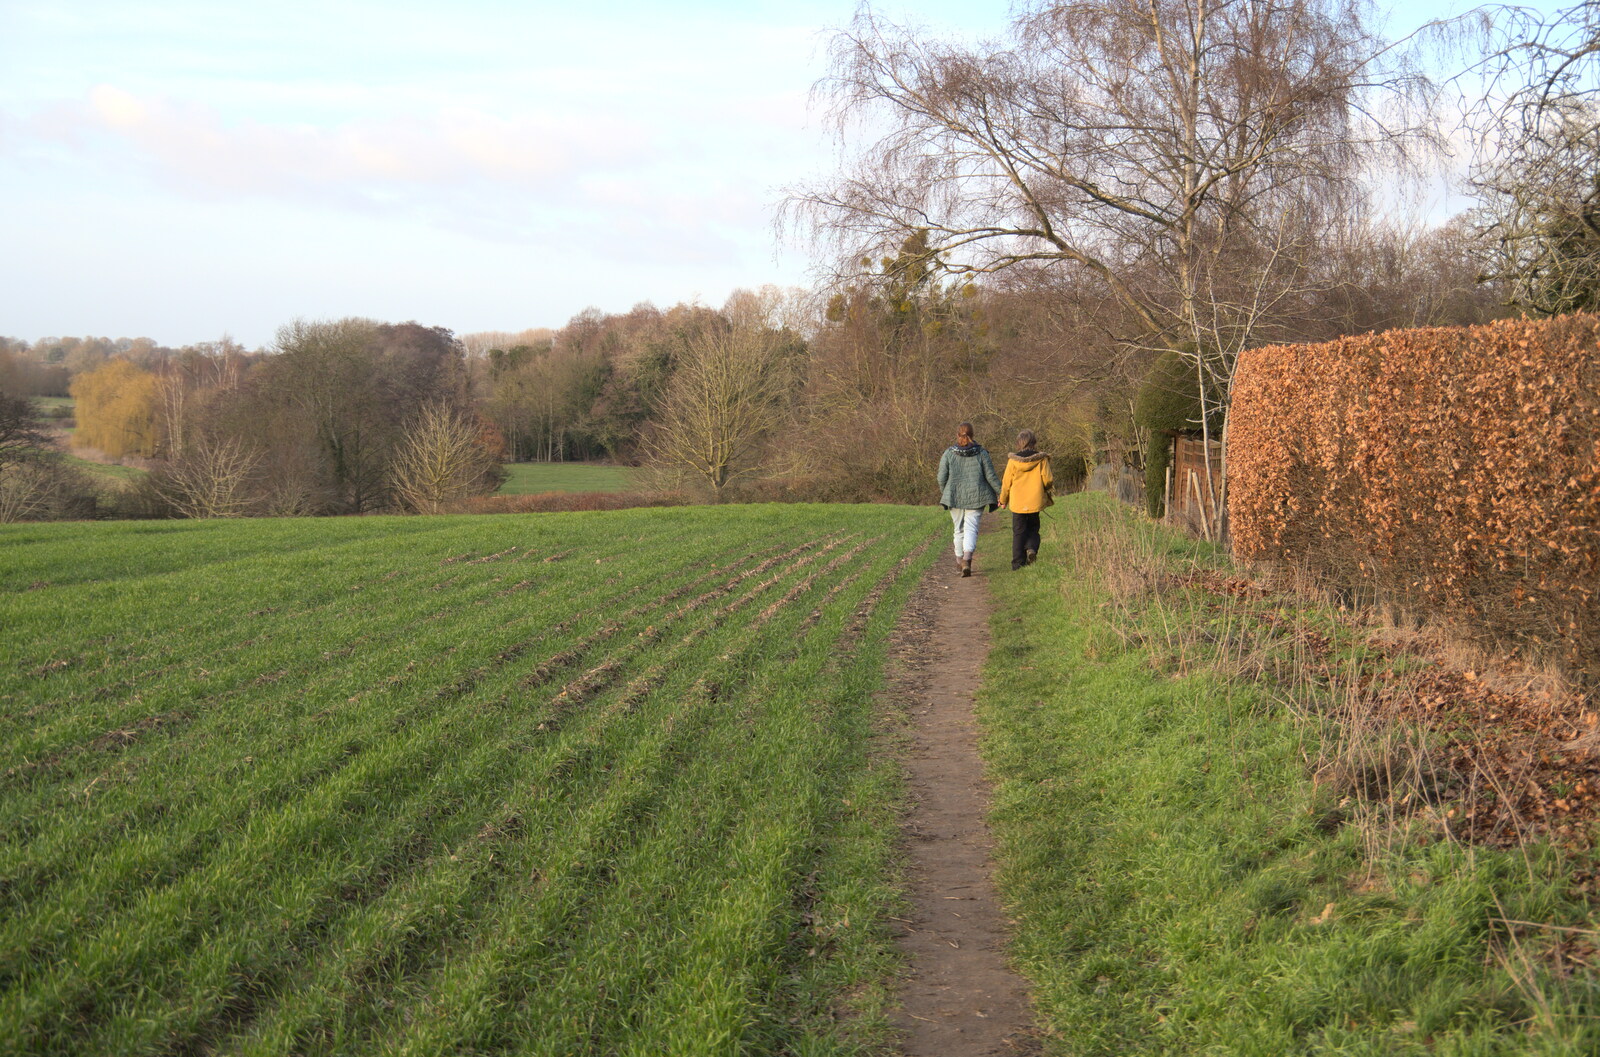 Isobel and Harry walk back from Another Walk to The Swan, Hoxne, Suffolk - 5th February 2023